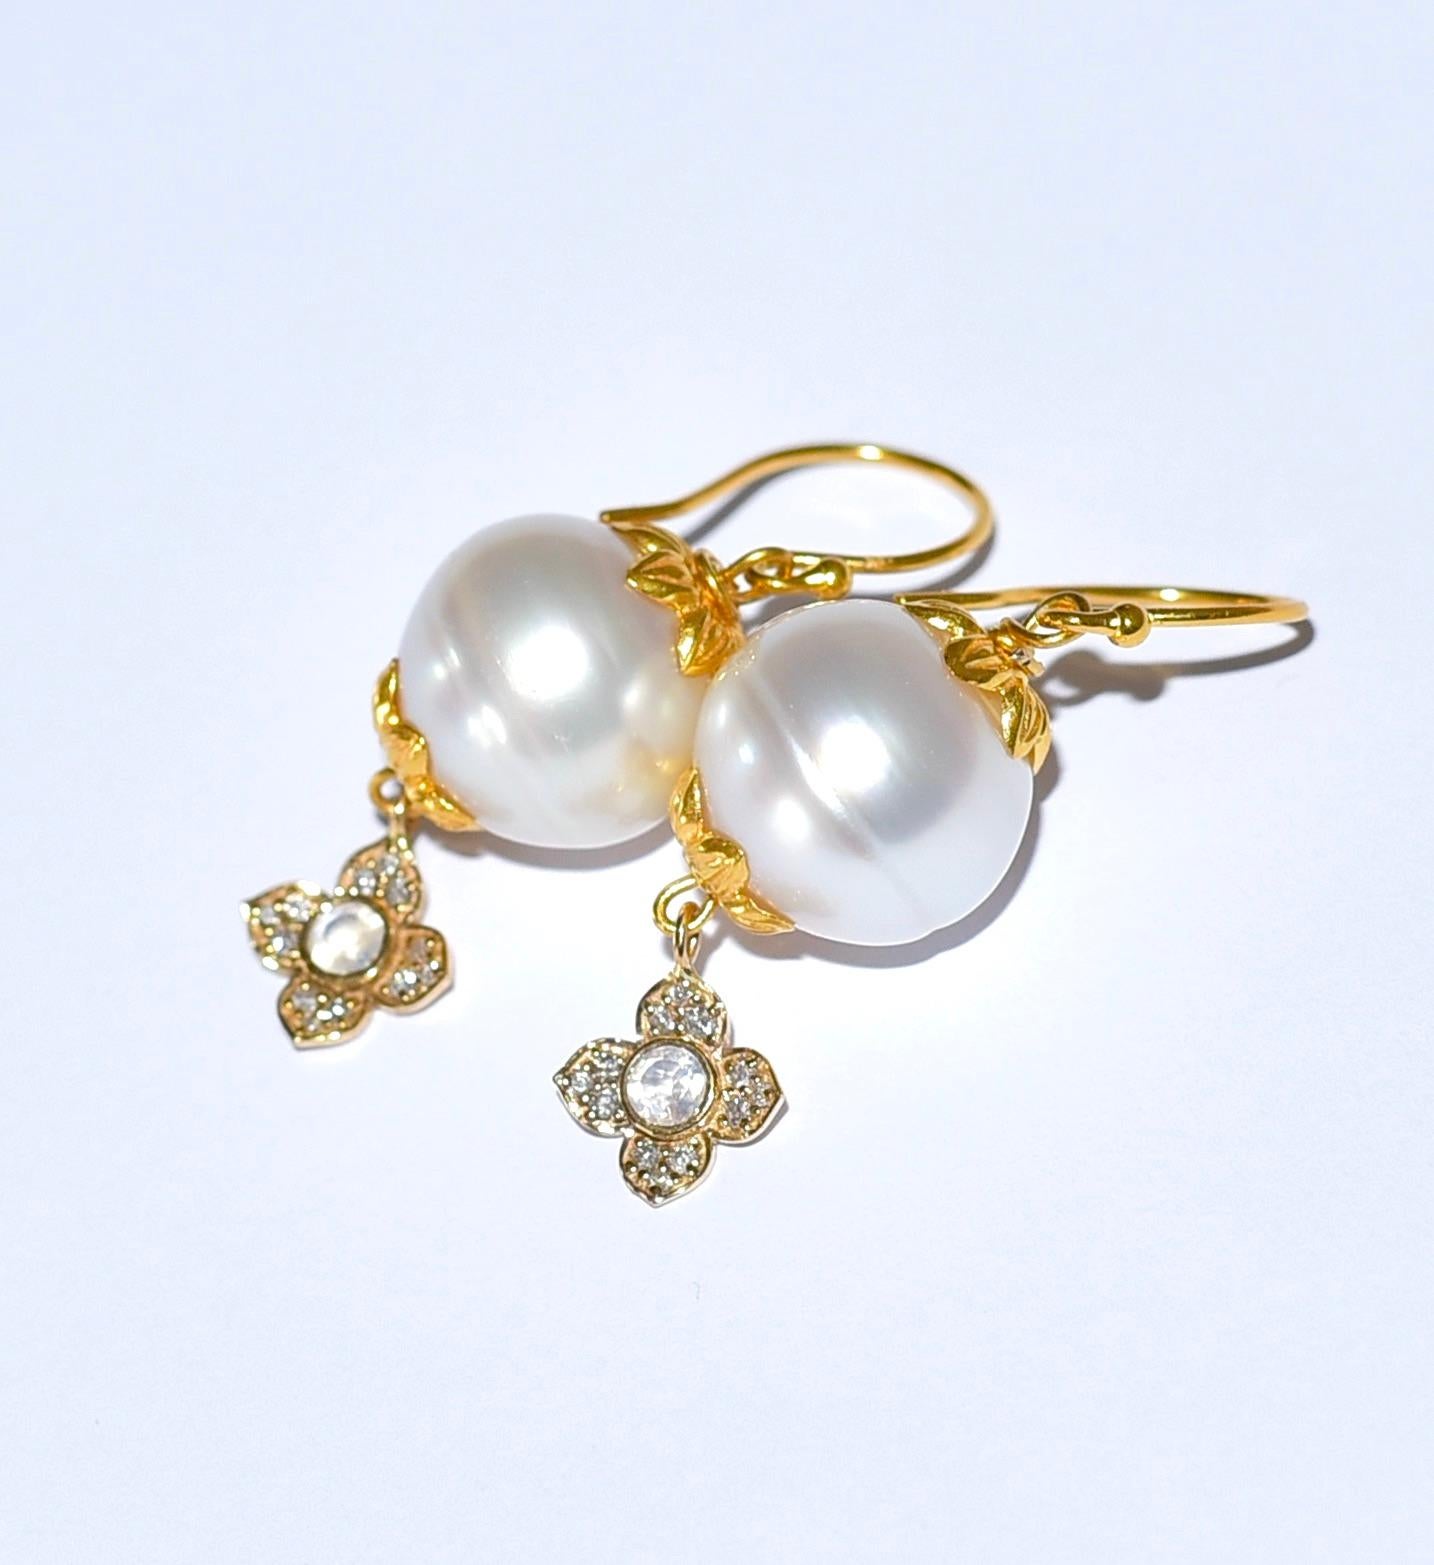 Bead South Sea Pearl, Diamond, Moonstone Earrings in 18K Solid Yellow Gold For Sale